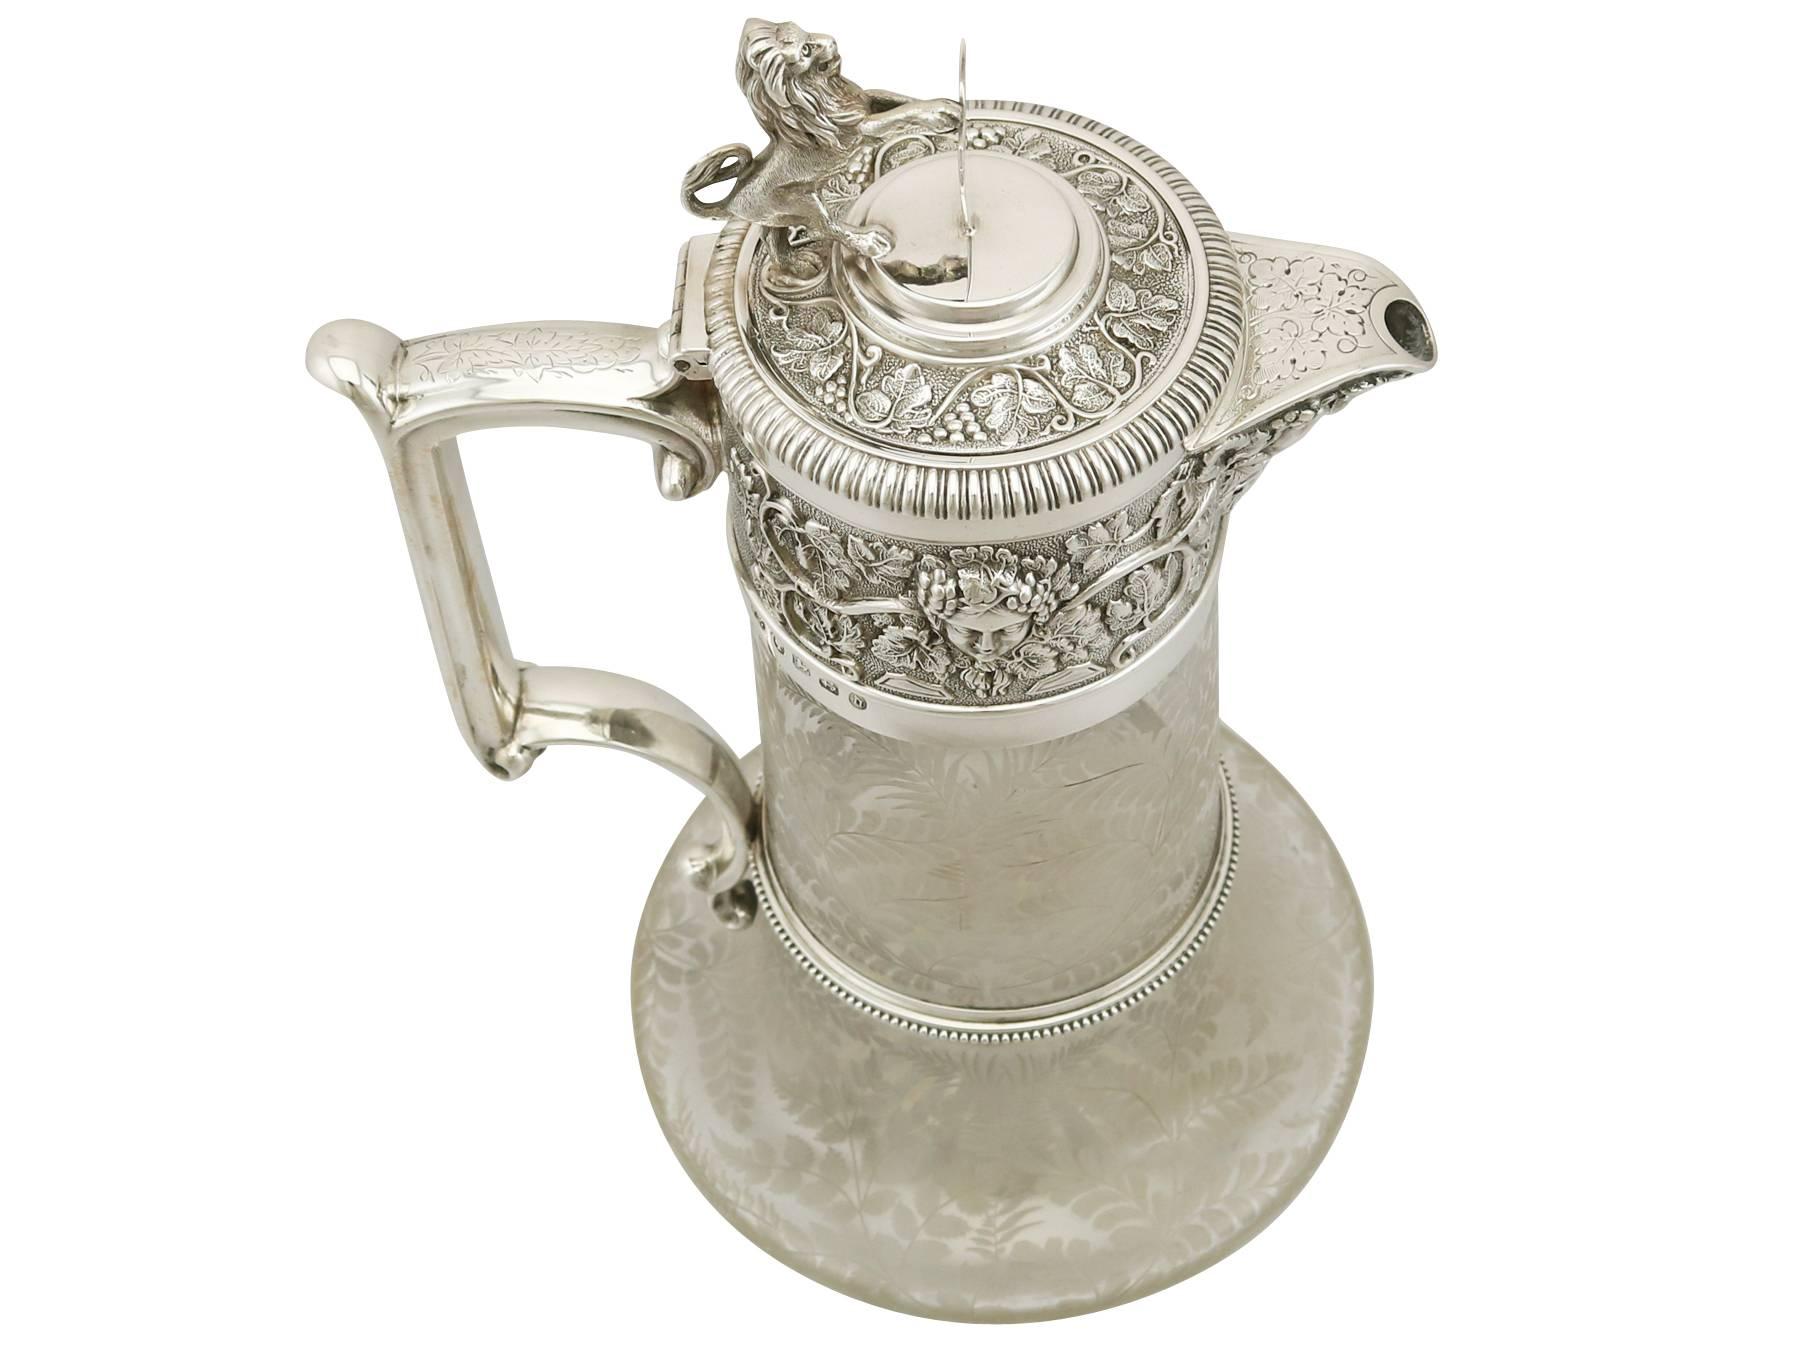 A magnificent, fine and impressive antique Victorian glass and English sterling silver mounted claret jug; part of our silver mounted glass collection

This magnificent antique Victorian glass and sterling silver mounted claret jug has a tapering